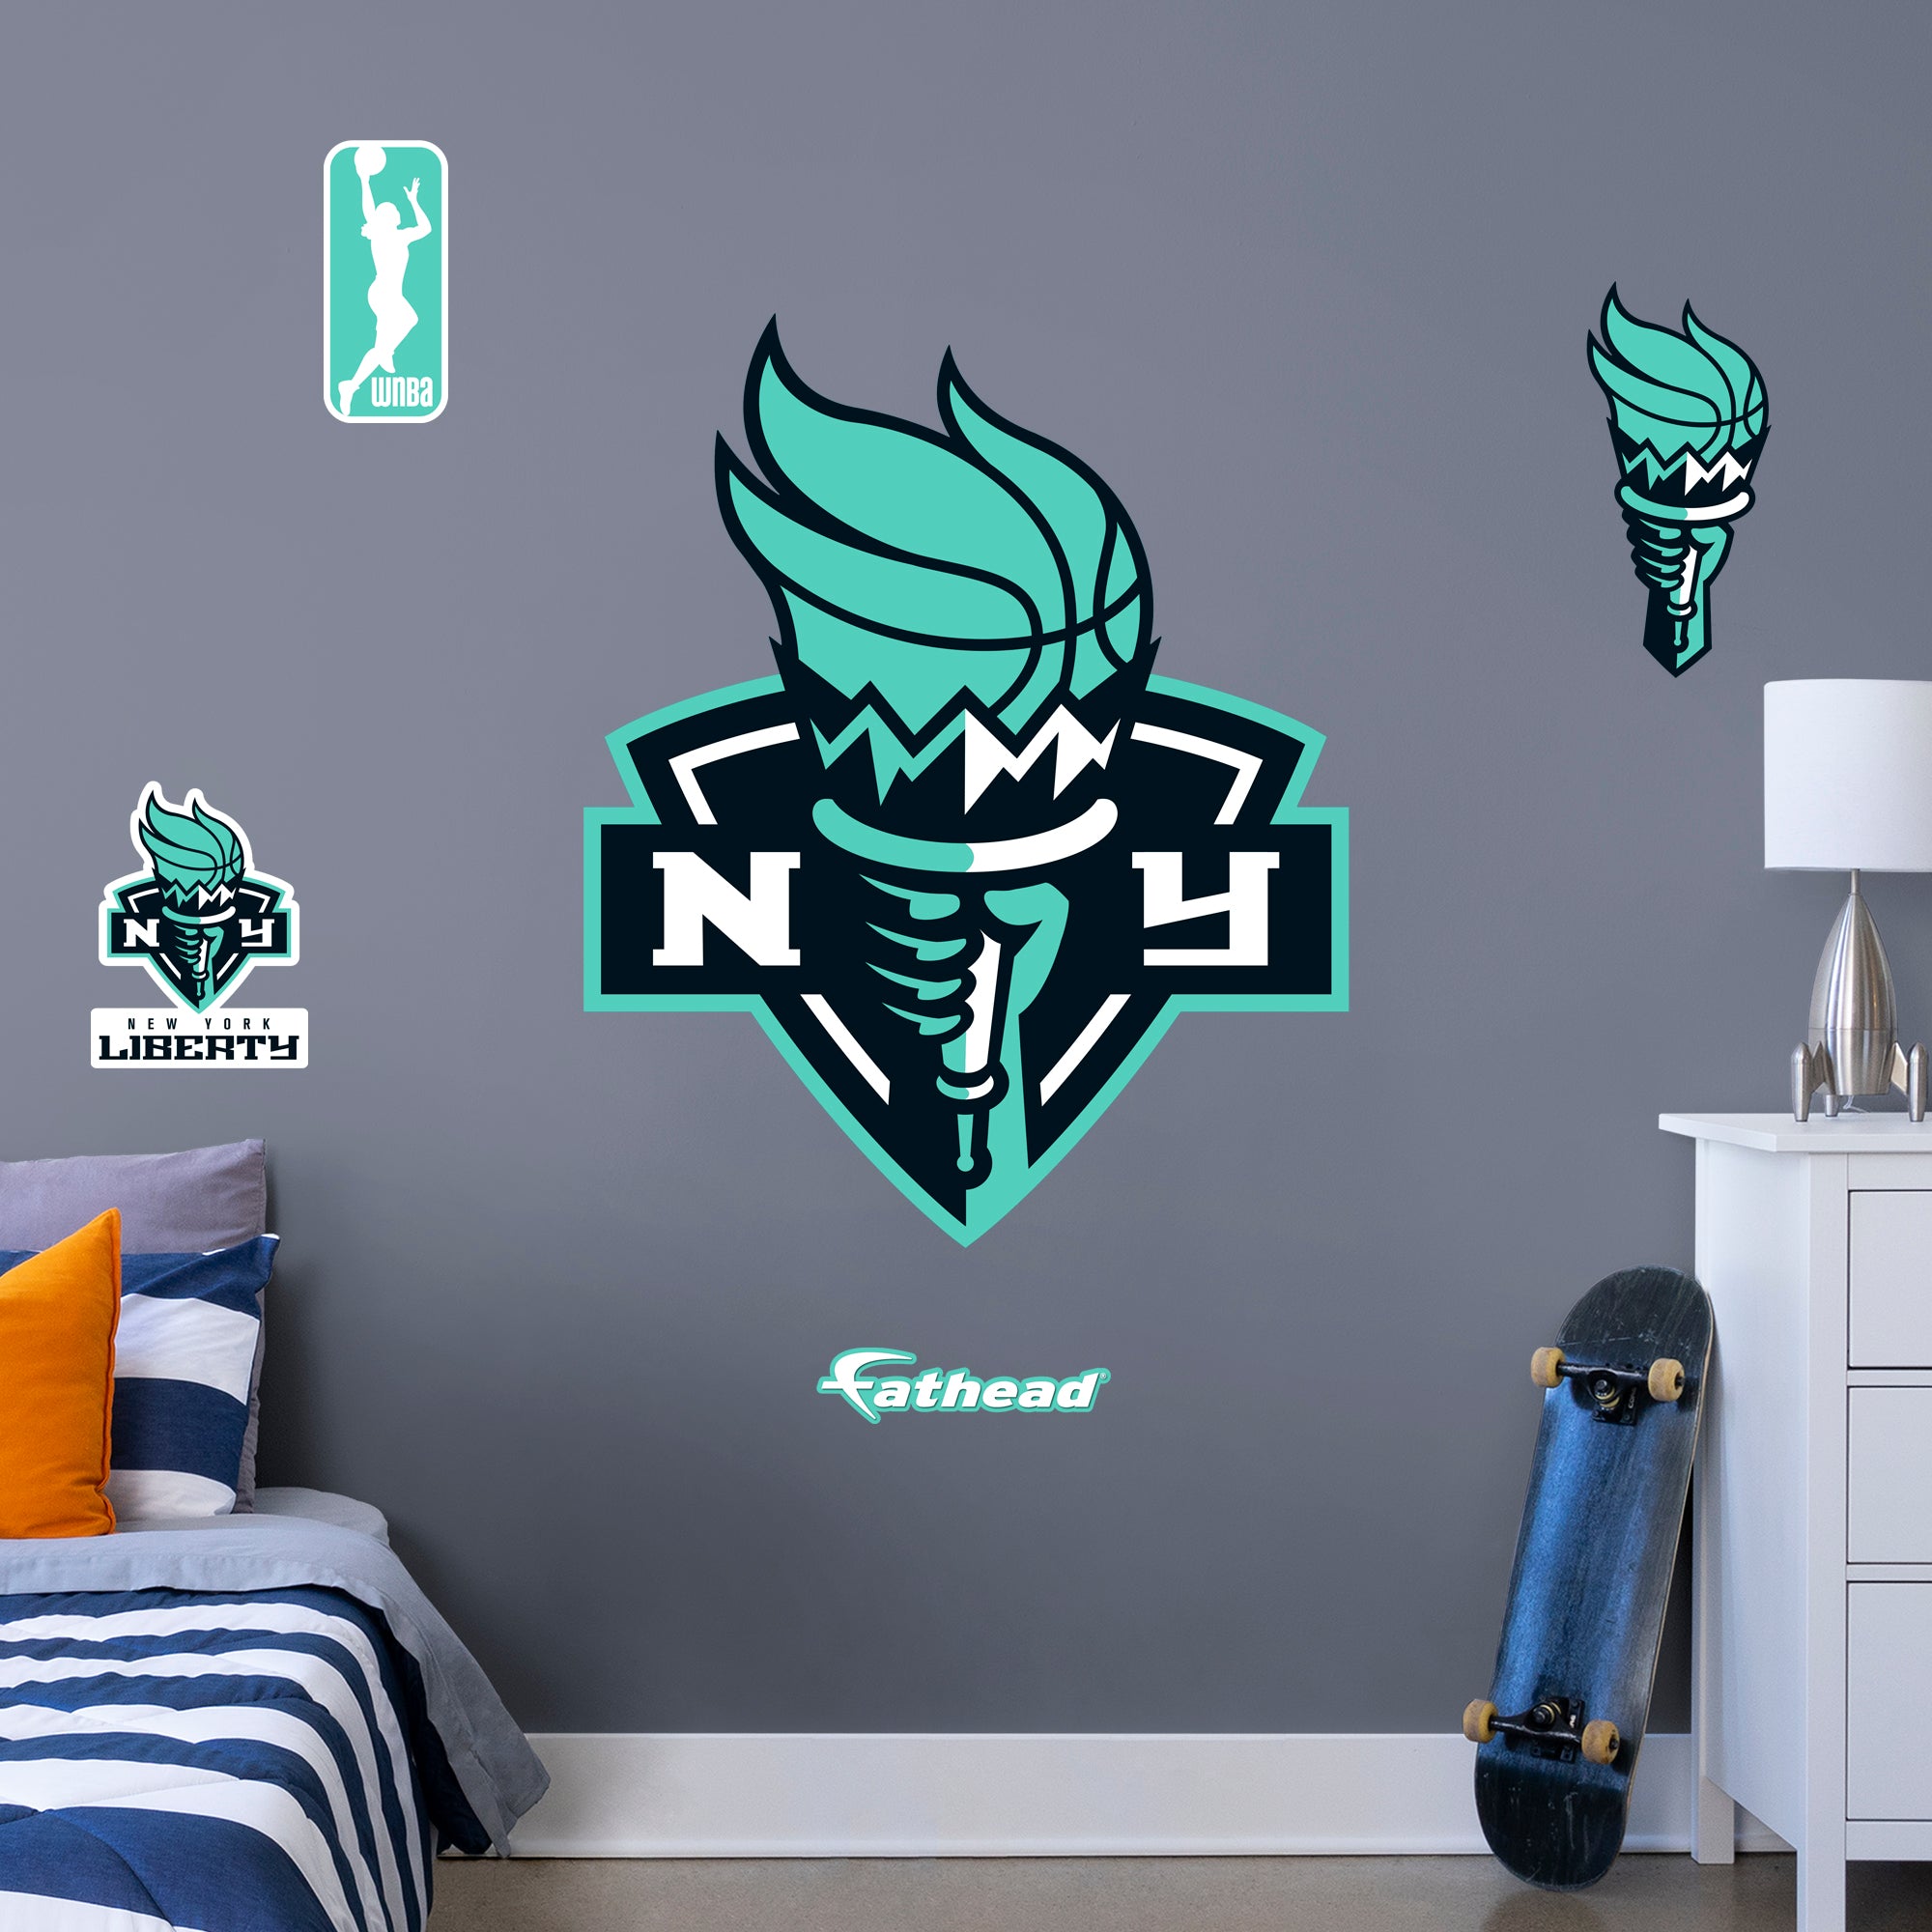 New York Liberty: Logo - Officially Licensed WNBA Removable Wall Decal Giant + 4 Decals by Fathead | Vinyl